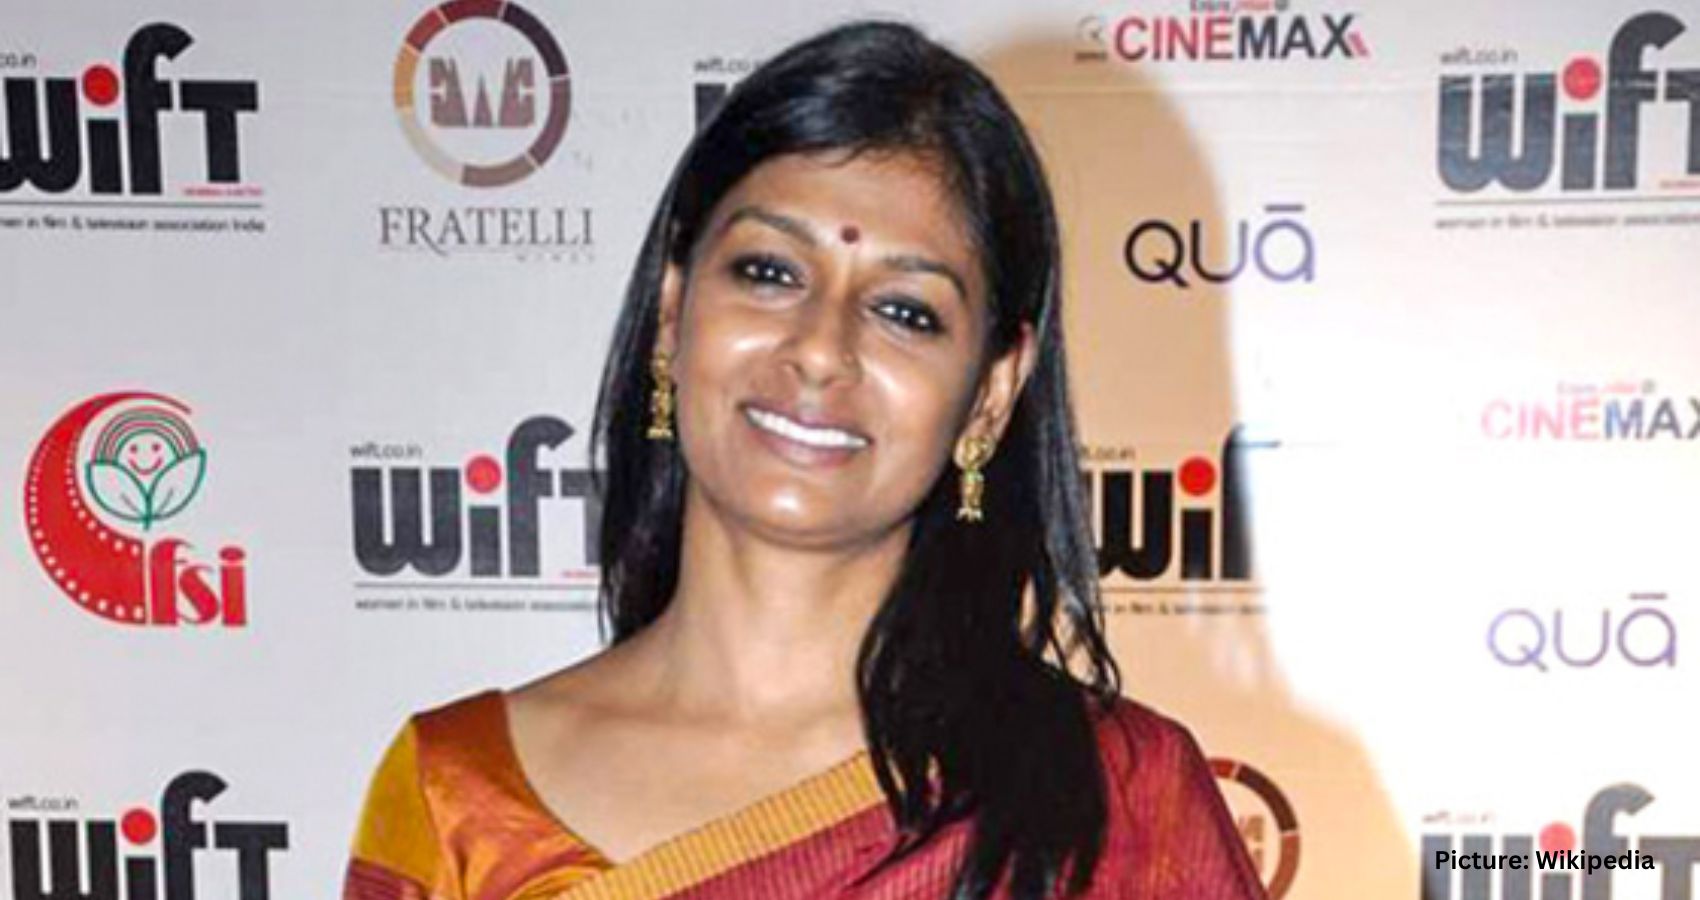 Featured & Cover Nandita Das Joins Global Film and Arts Luminaries to Judge WHO's 5th Health for All Film Festival Celebrating Powerful Health Stories